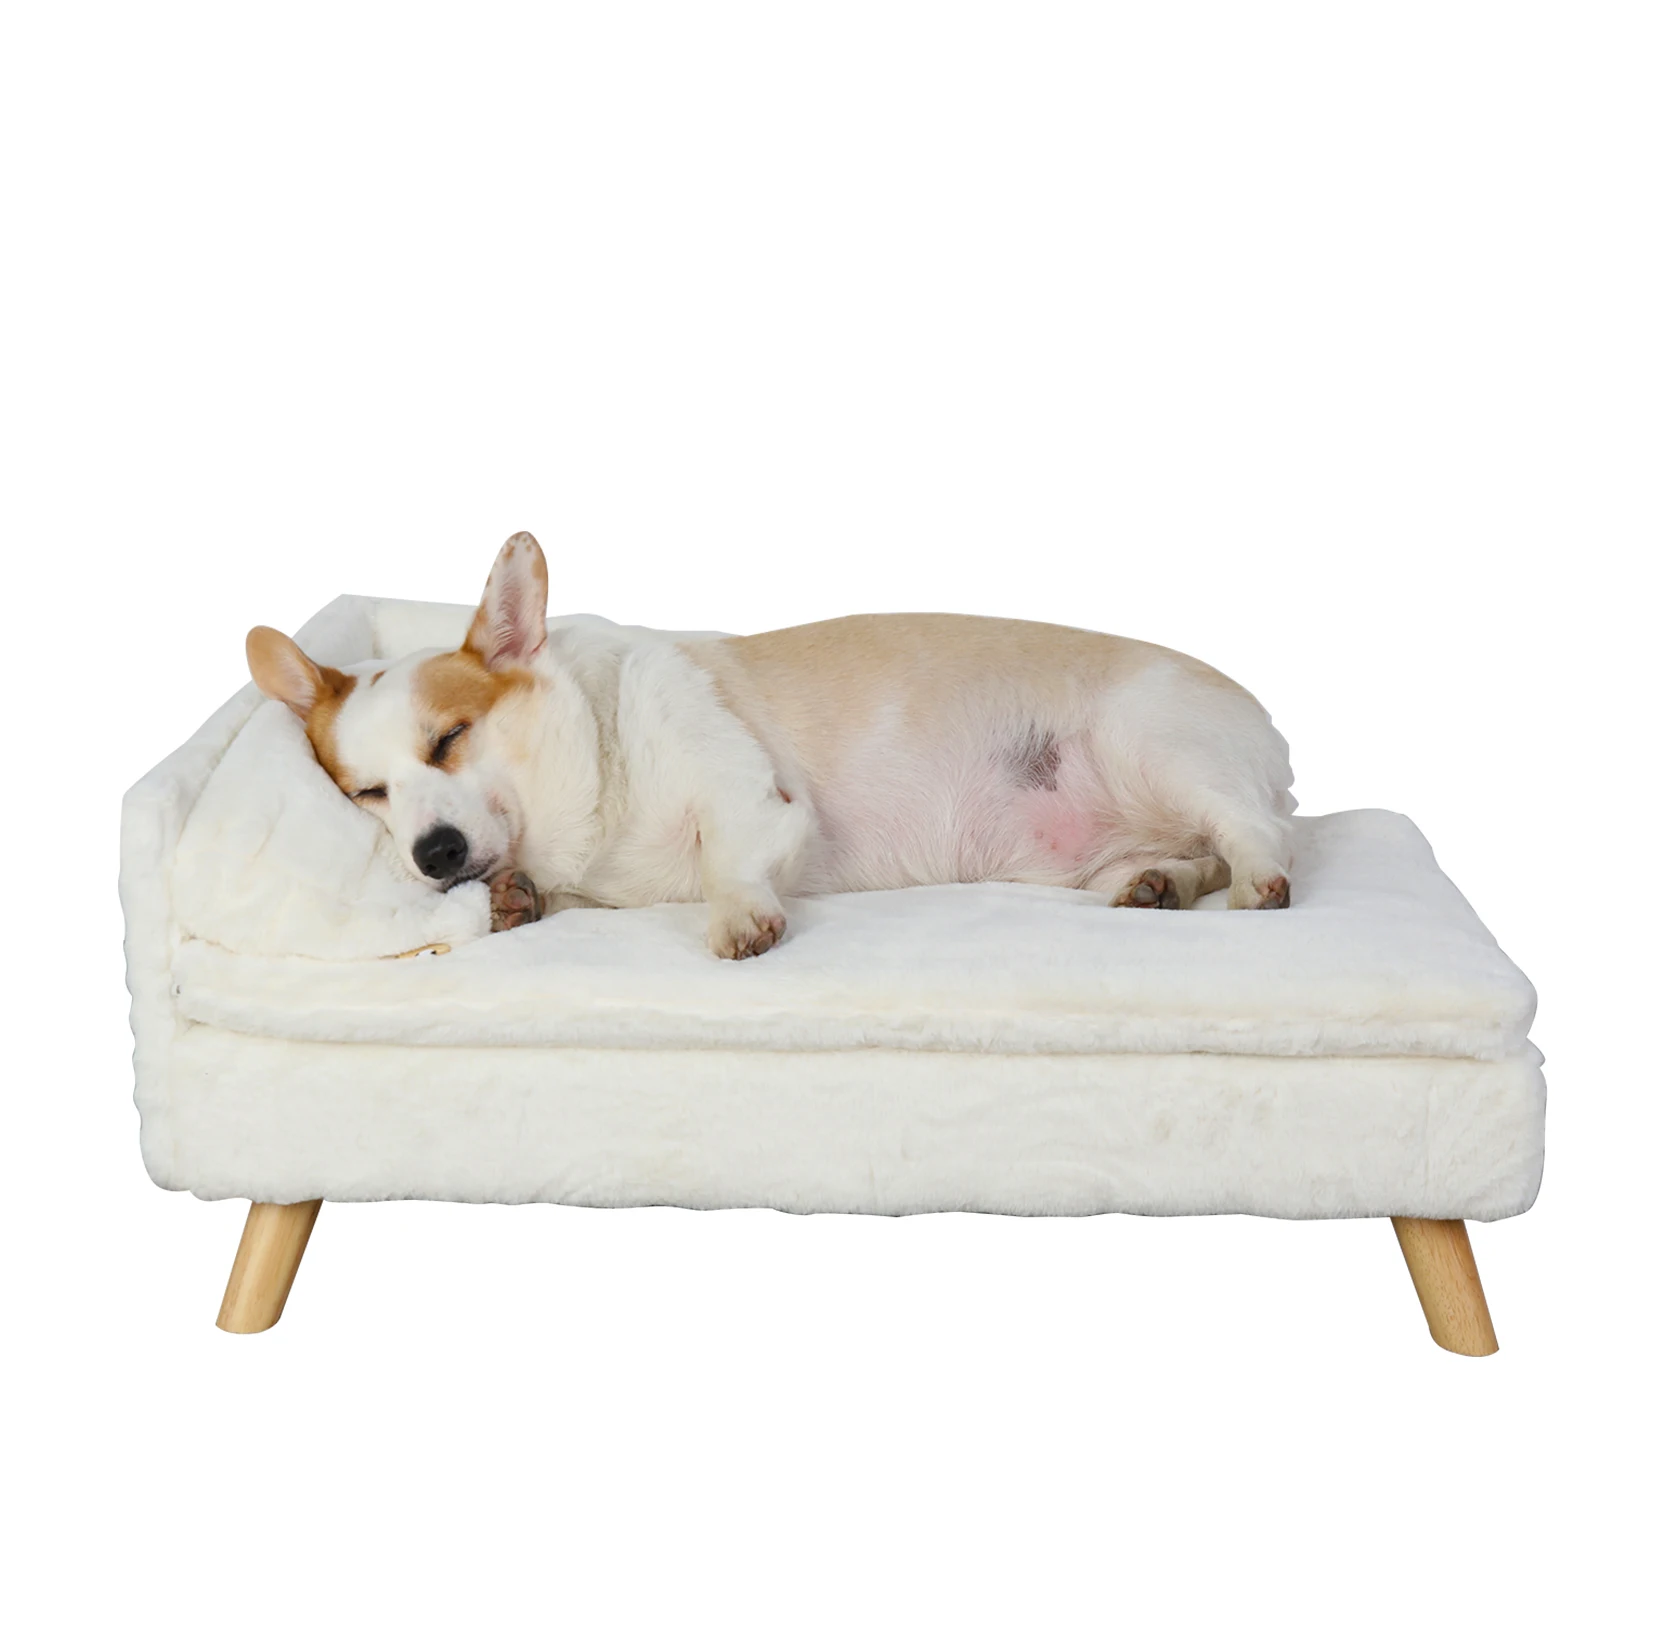 Nordic Elevated Pet Sofa Bed with Cozy Pad and Sturdy Wood Legs - Waterproof for Small Dogs and Kittens